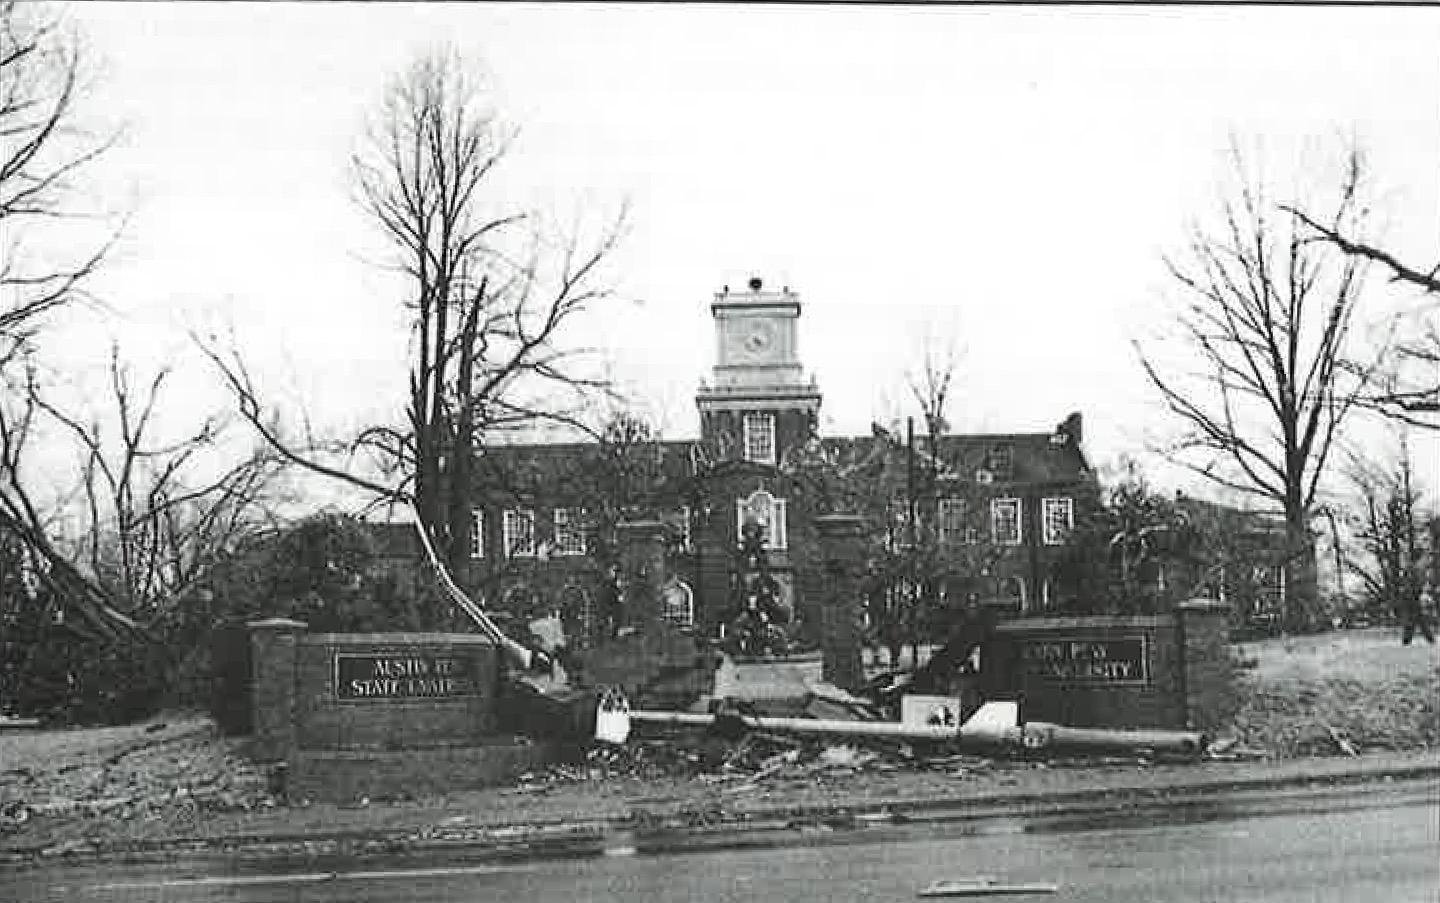 The Browning, pictured, Clement, Harned, Harvill and Archwood buildings were badly damaged during a Jan. 22, 1999, tornado that ripped through Clarksville.